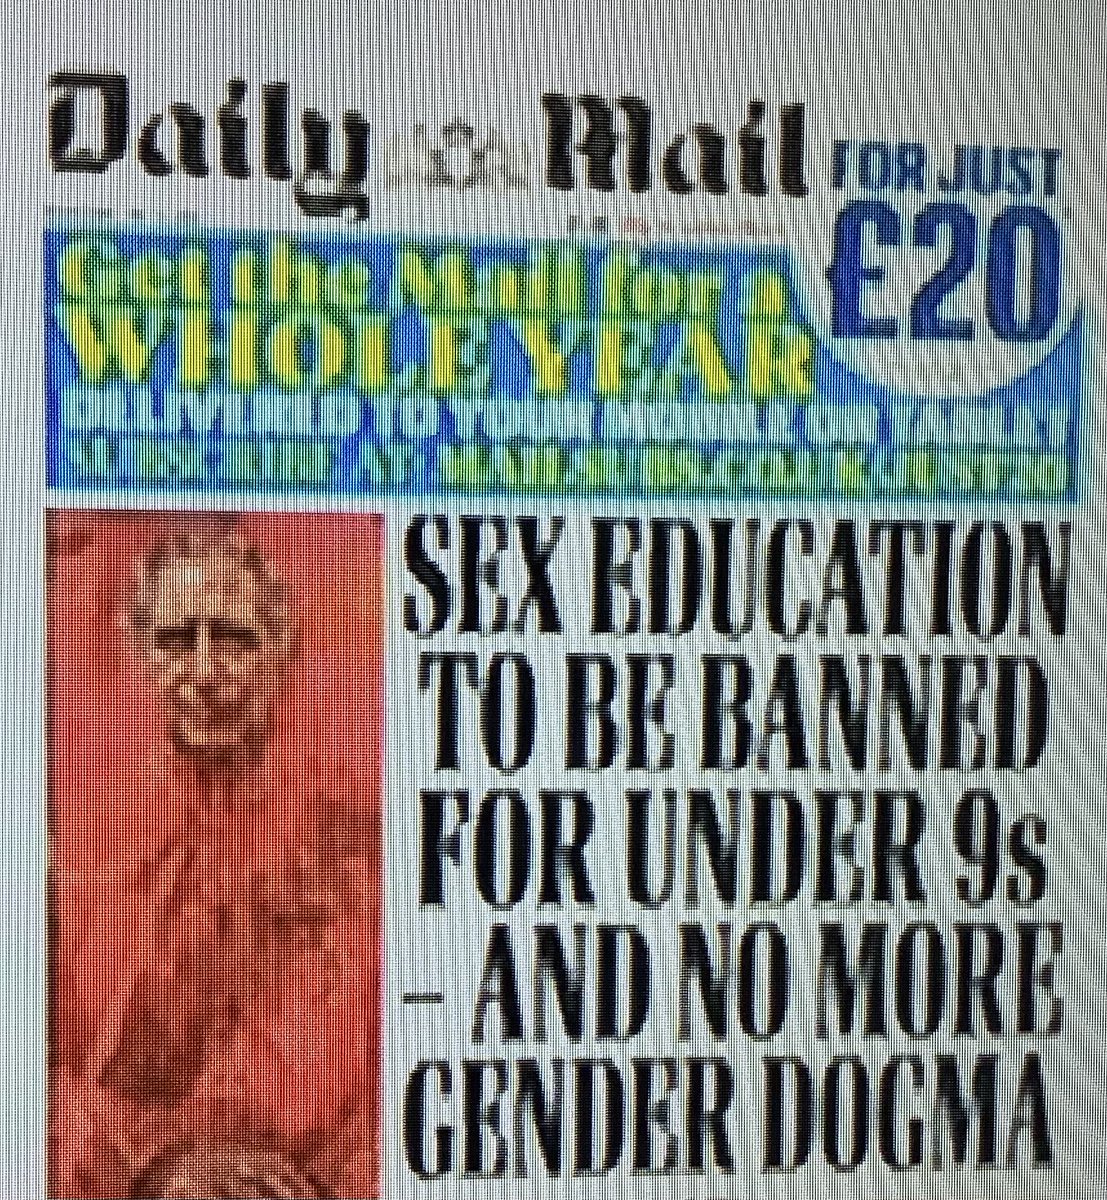 Government in London making common sense decision.  Meanwhile Dublin Government continues with plans to sexualise our children.